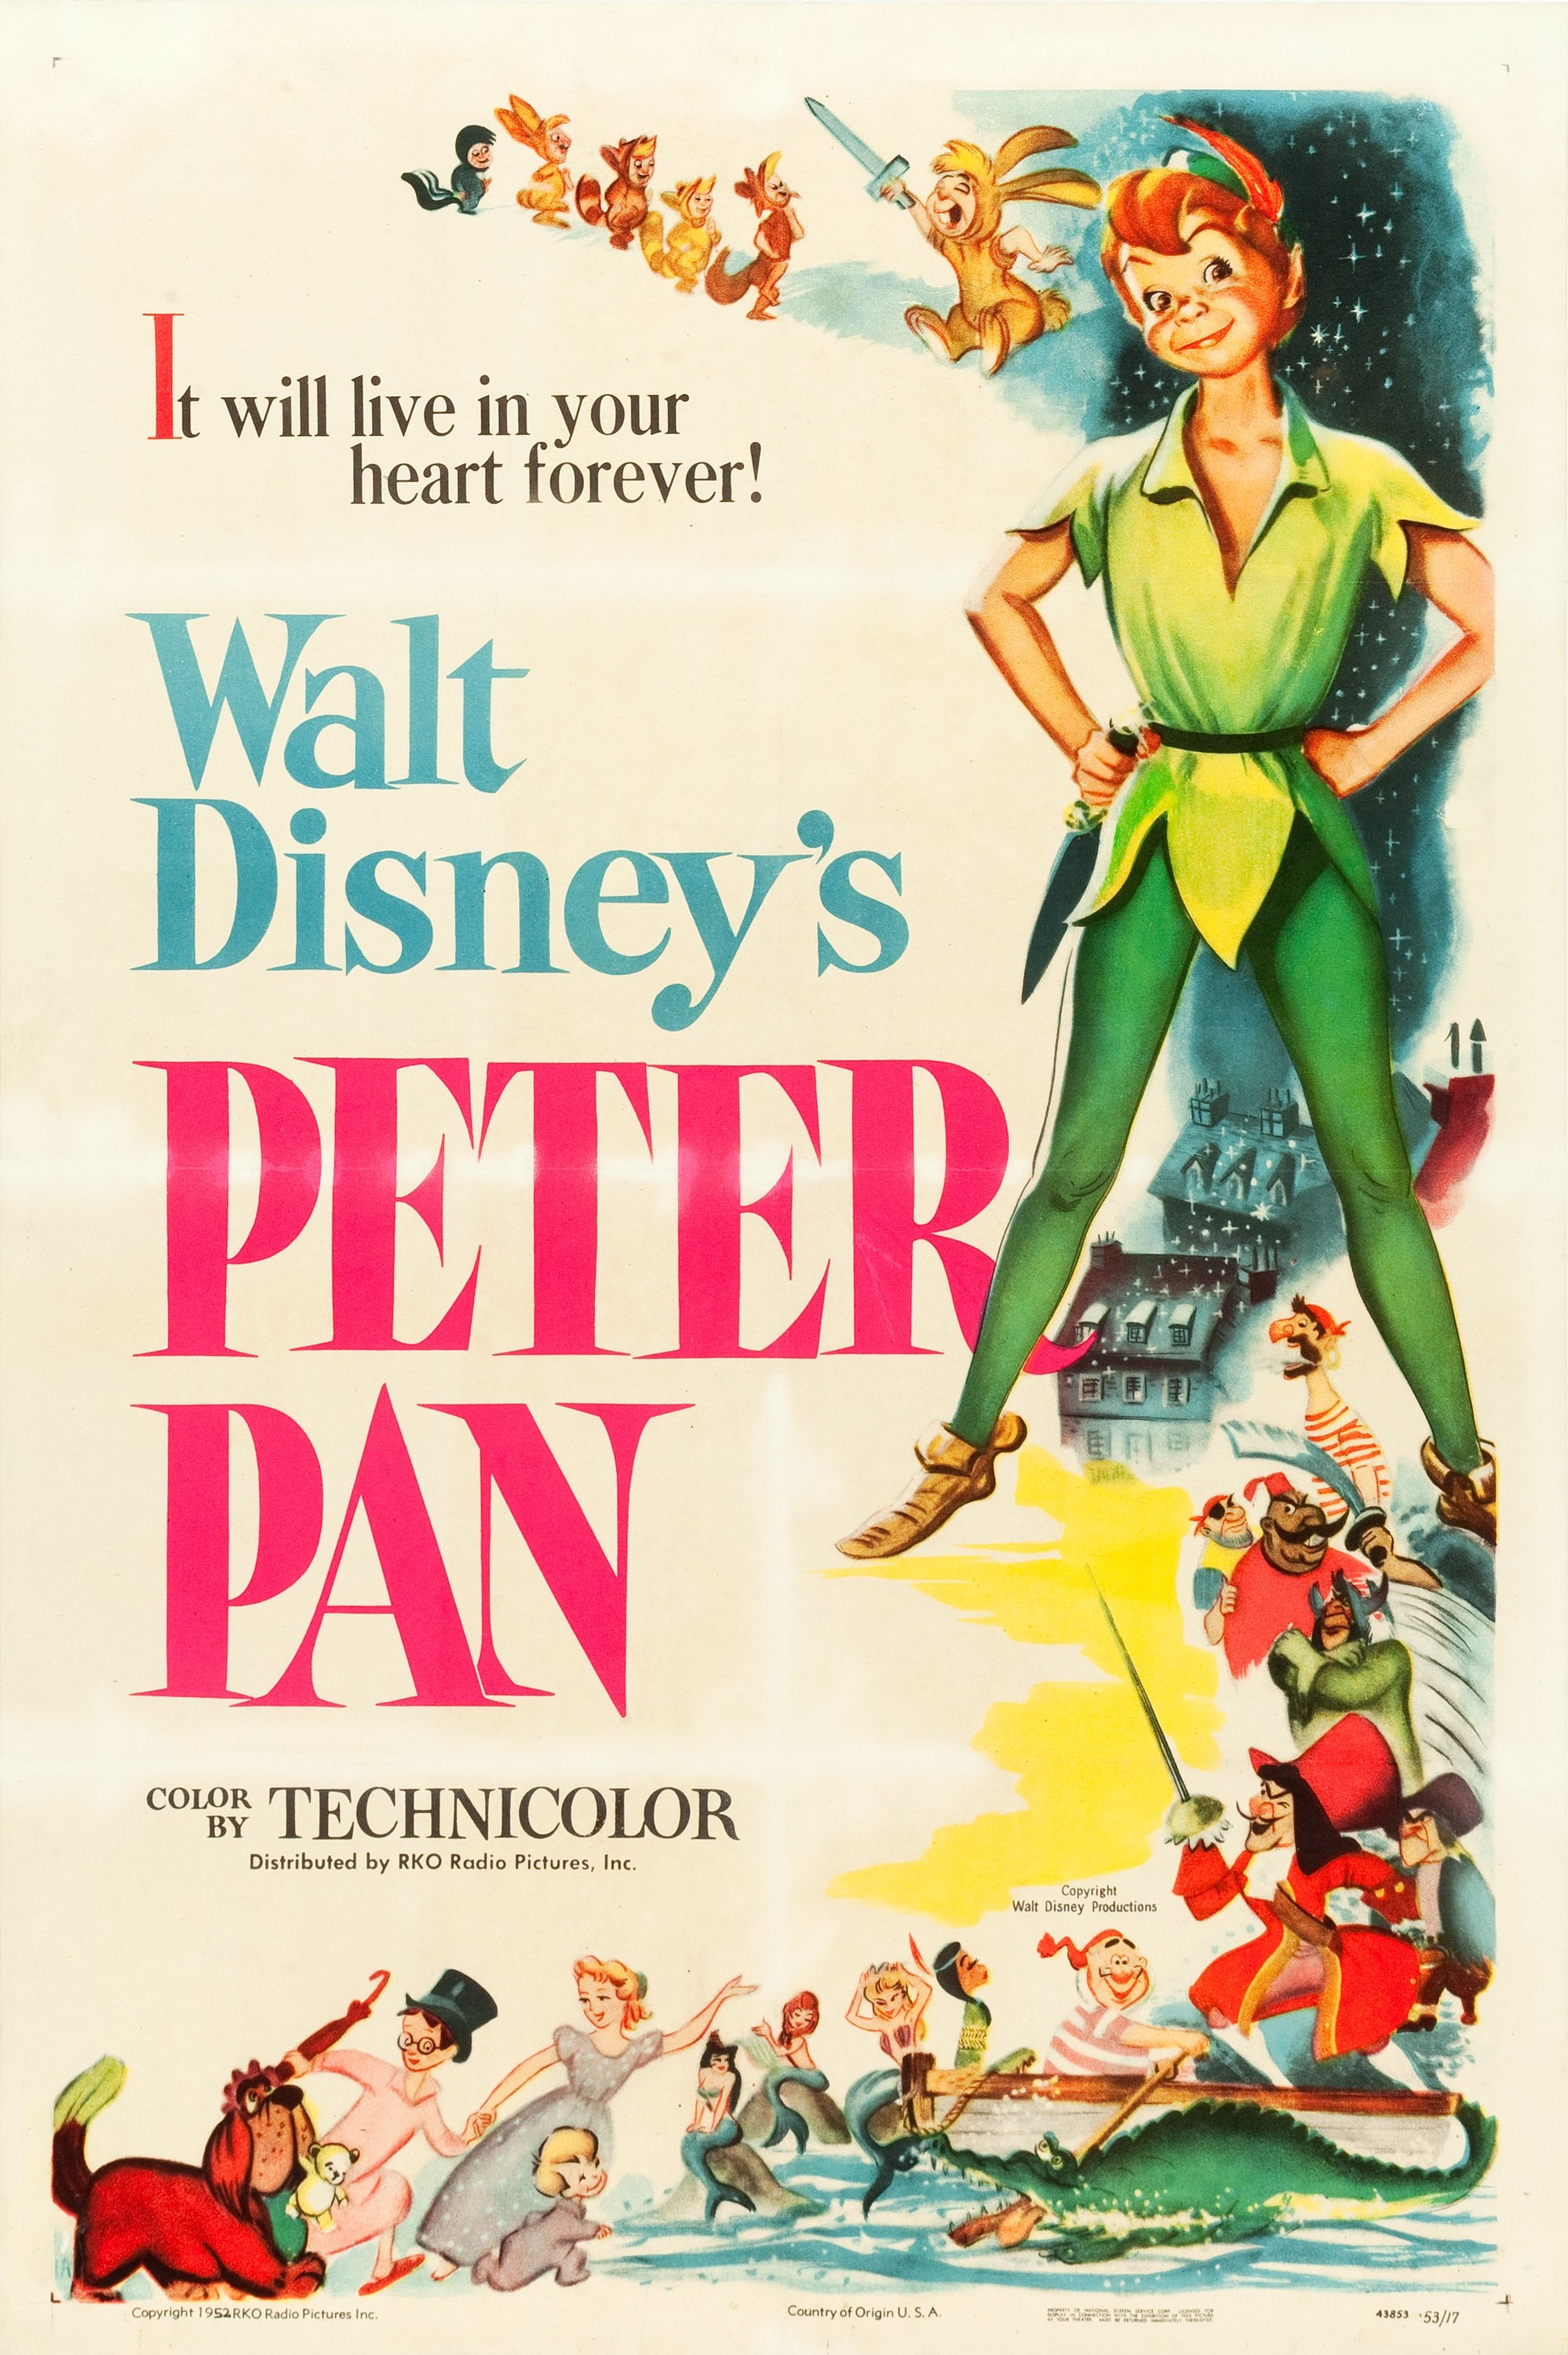 The New Adventures of Peter Pan - streaming online